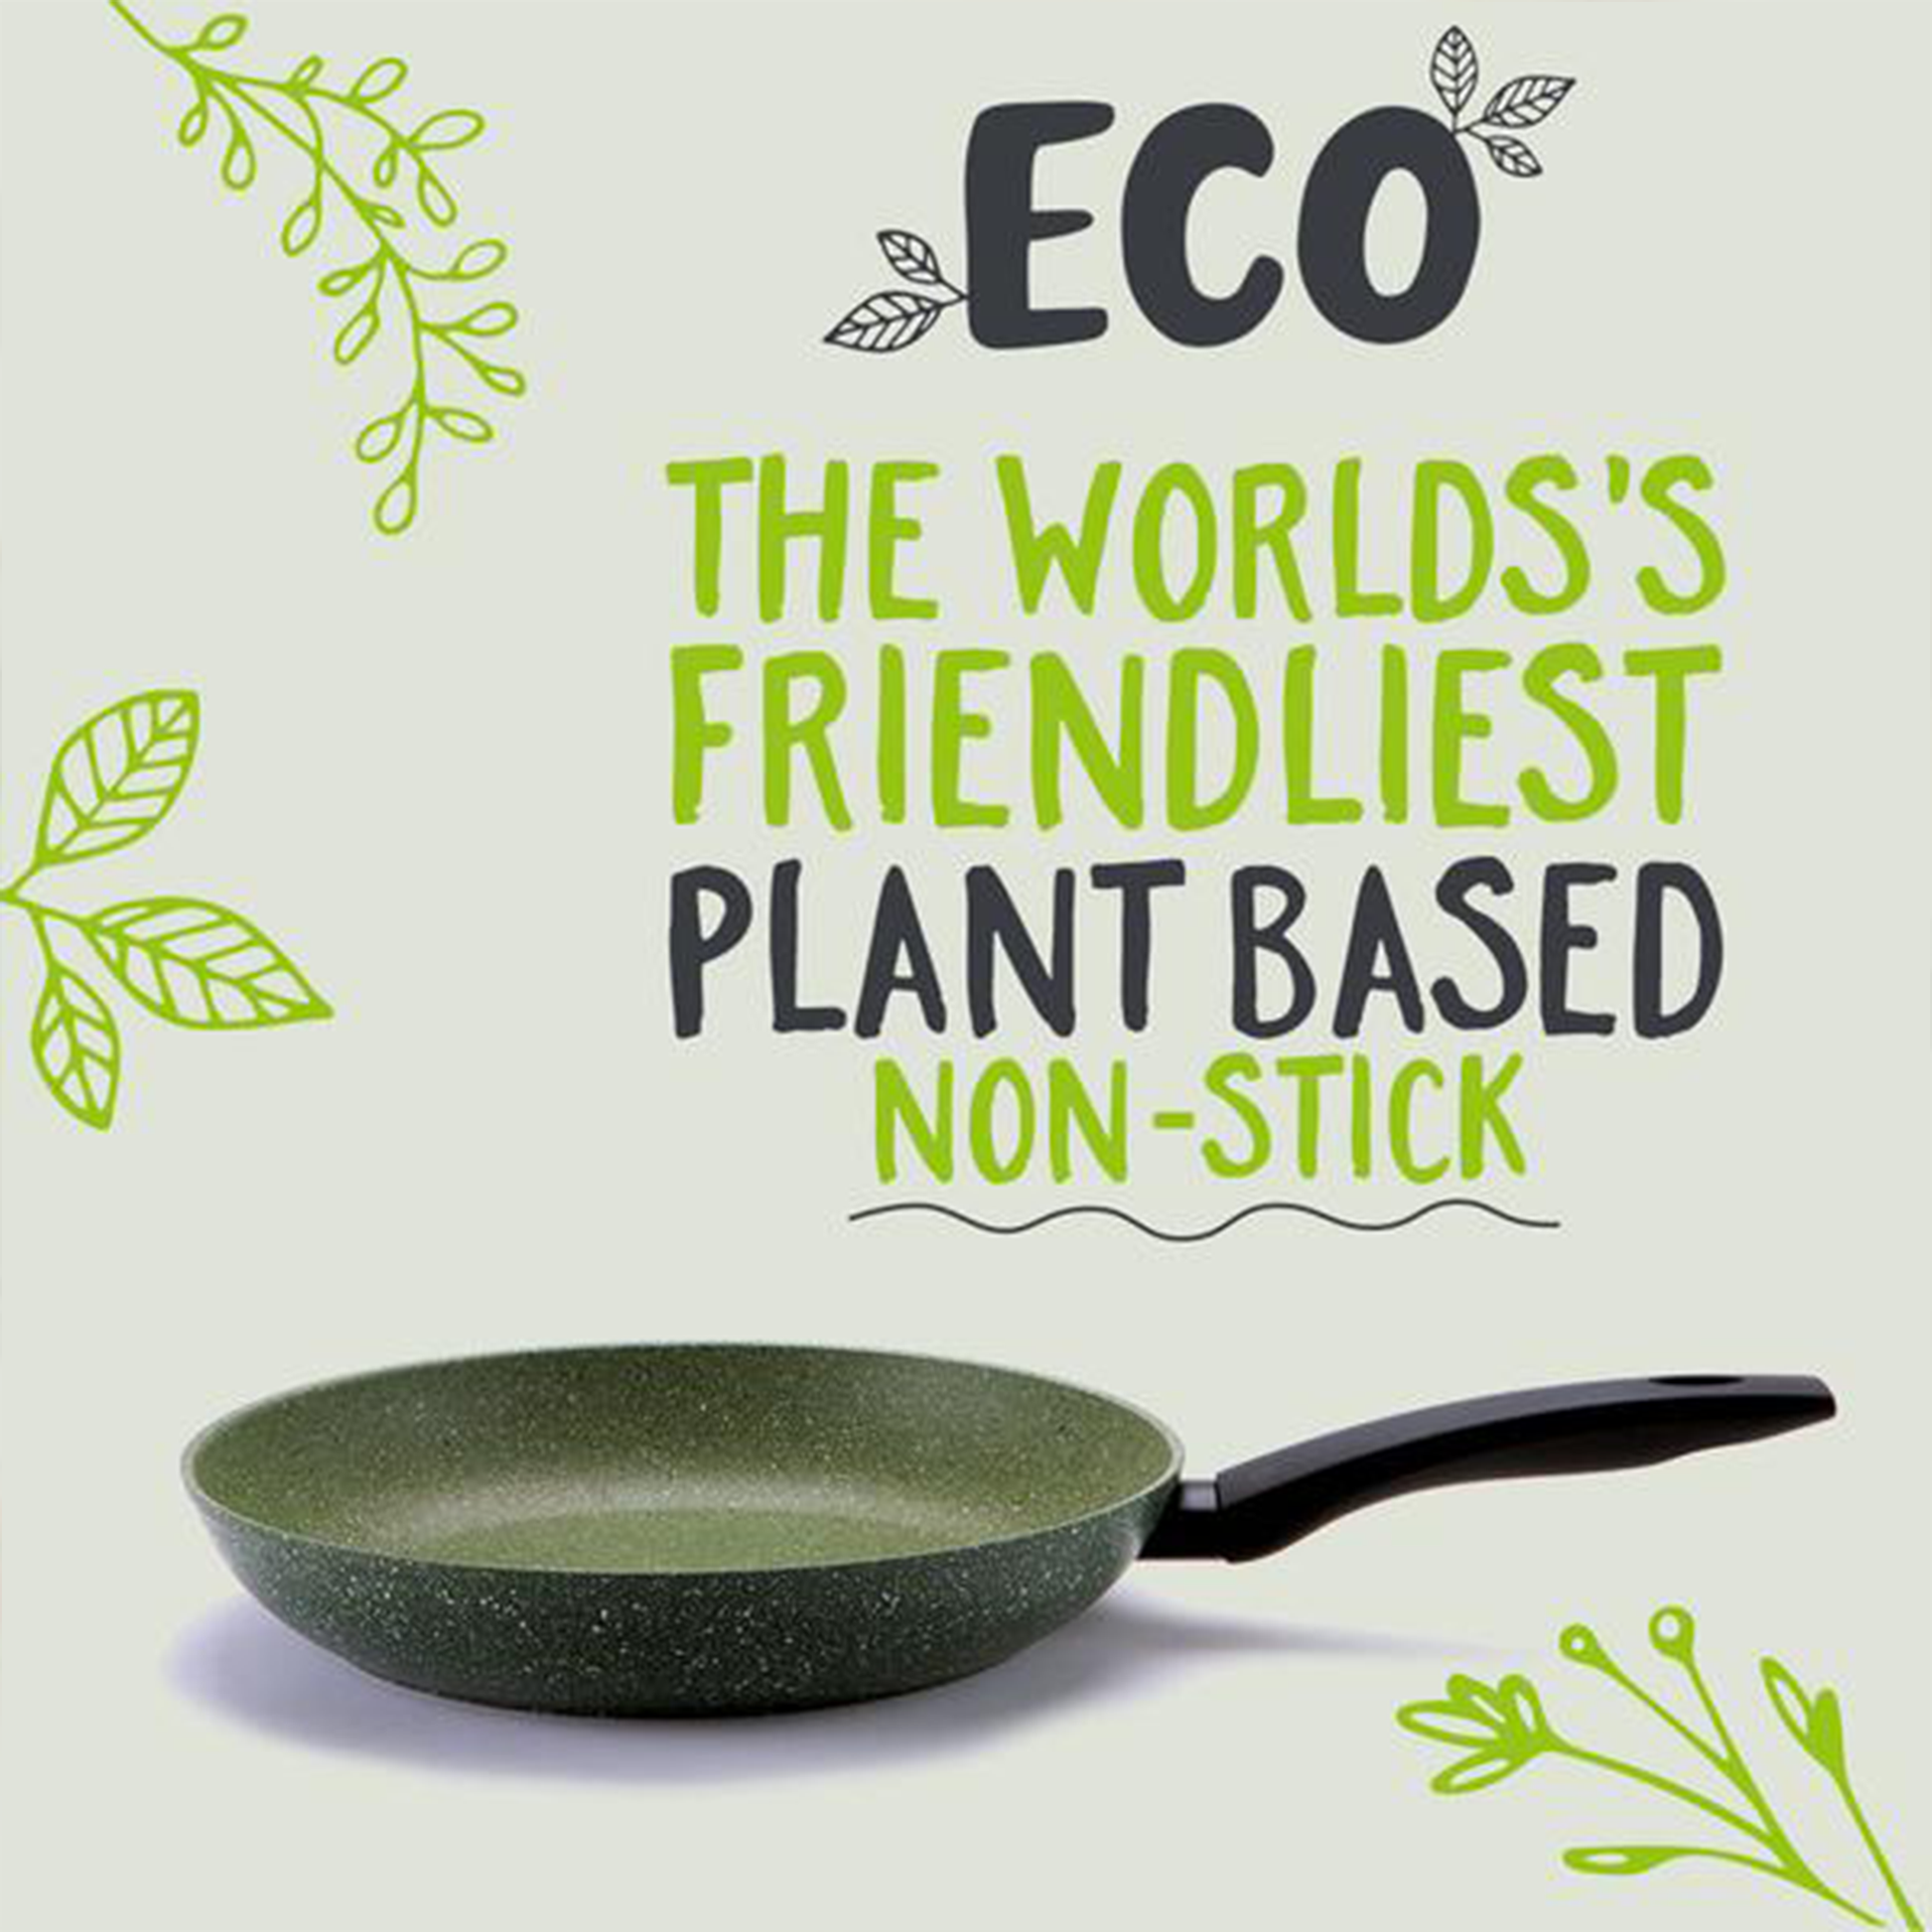 the pan and it's eco credentials